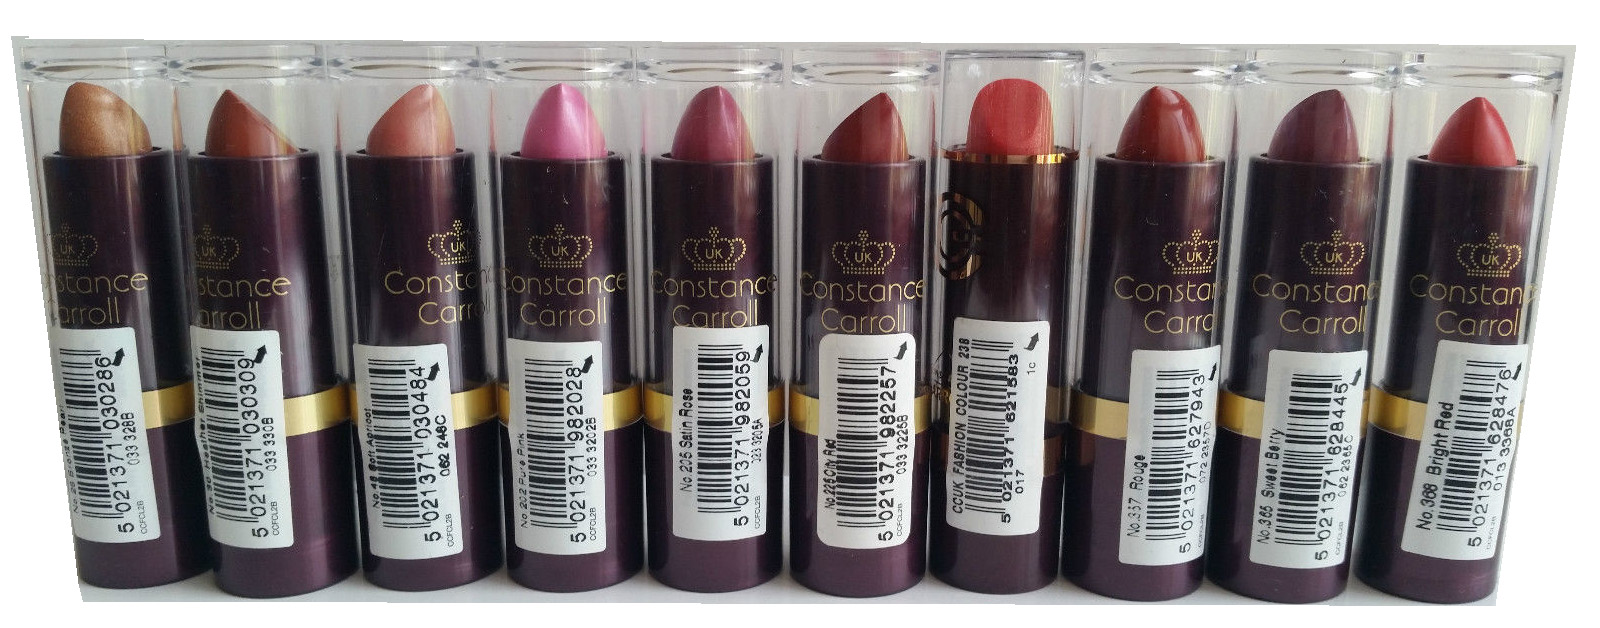 Constance Carroll UK Fashion Colour Lipstick - 66 Healthy Shimmer